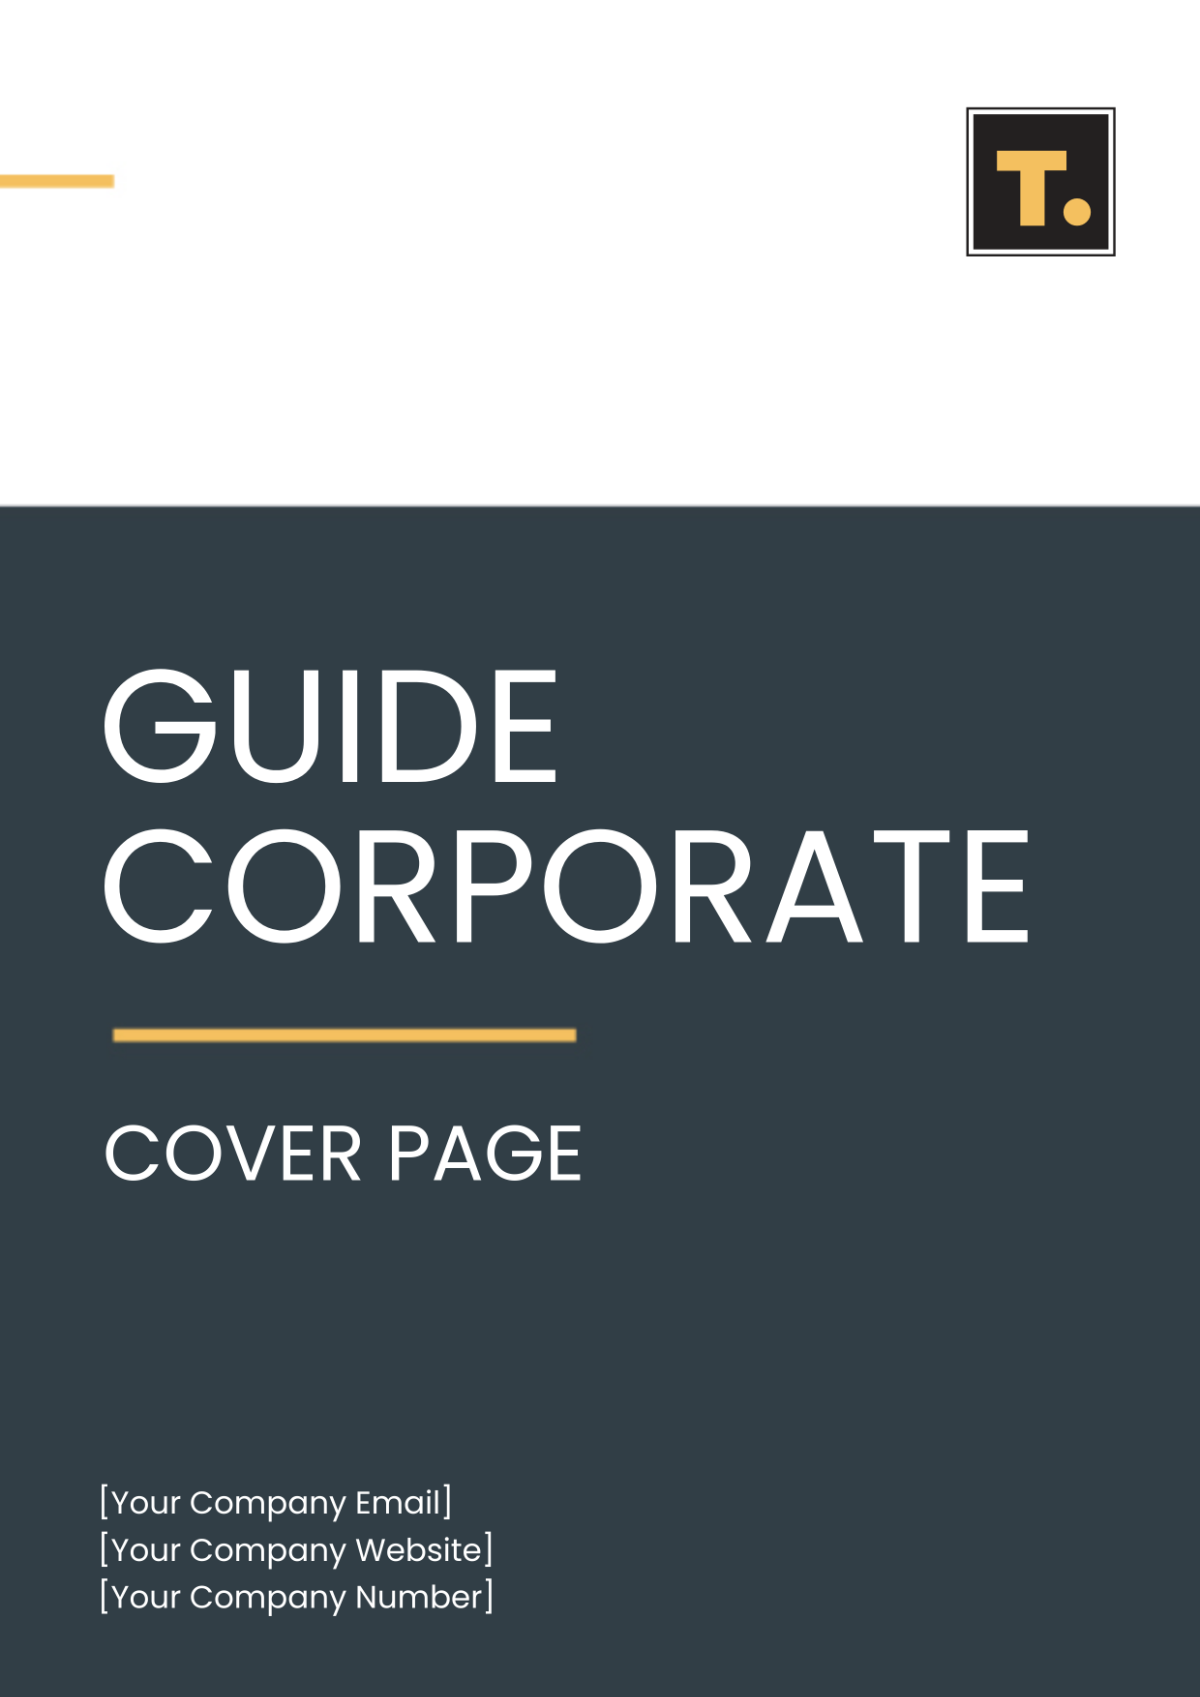 Guide Corporate Cover Page